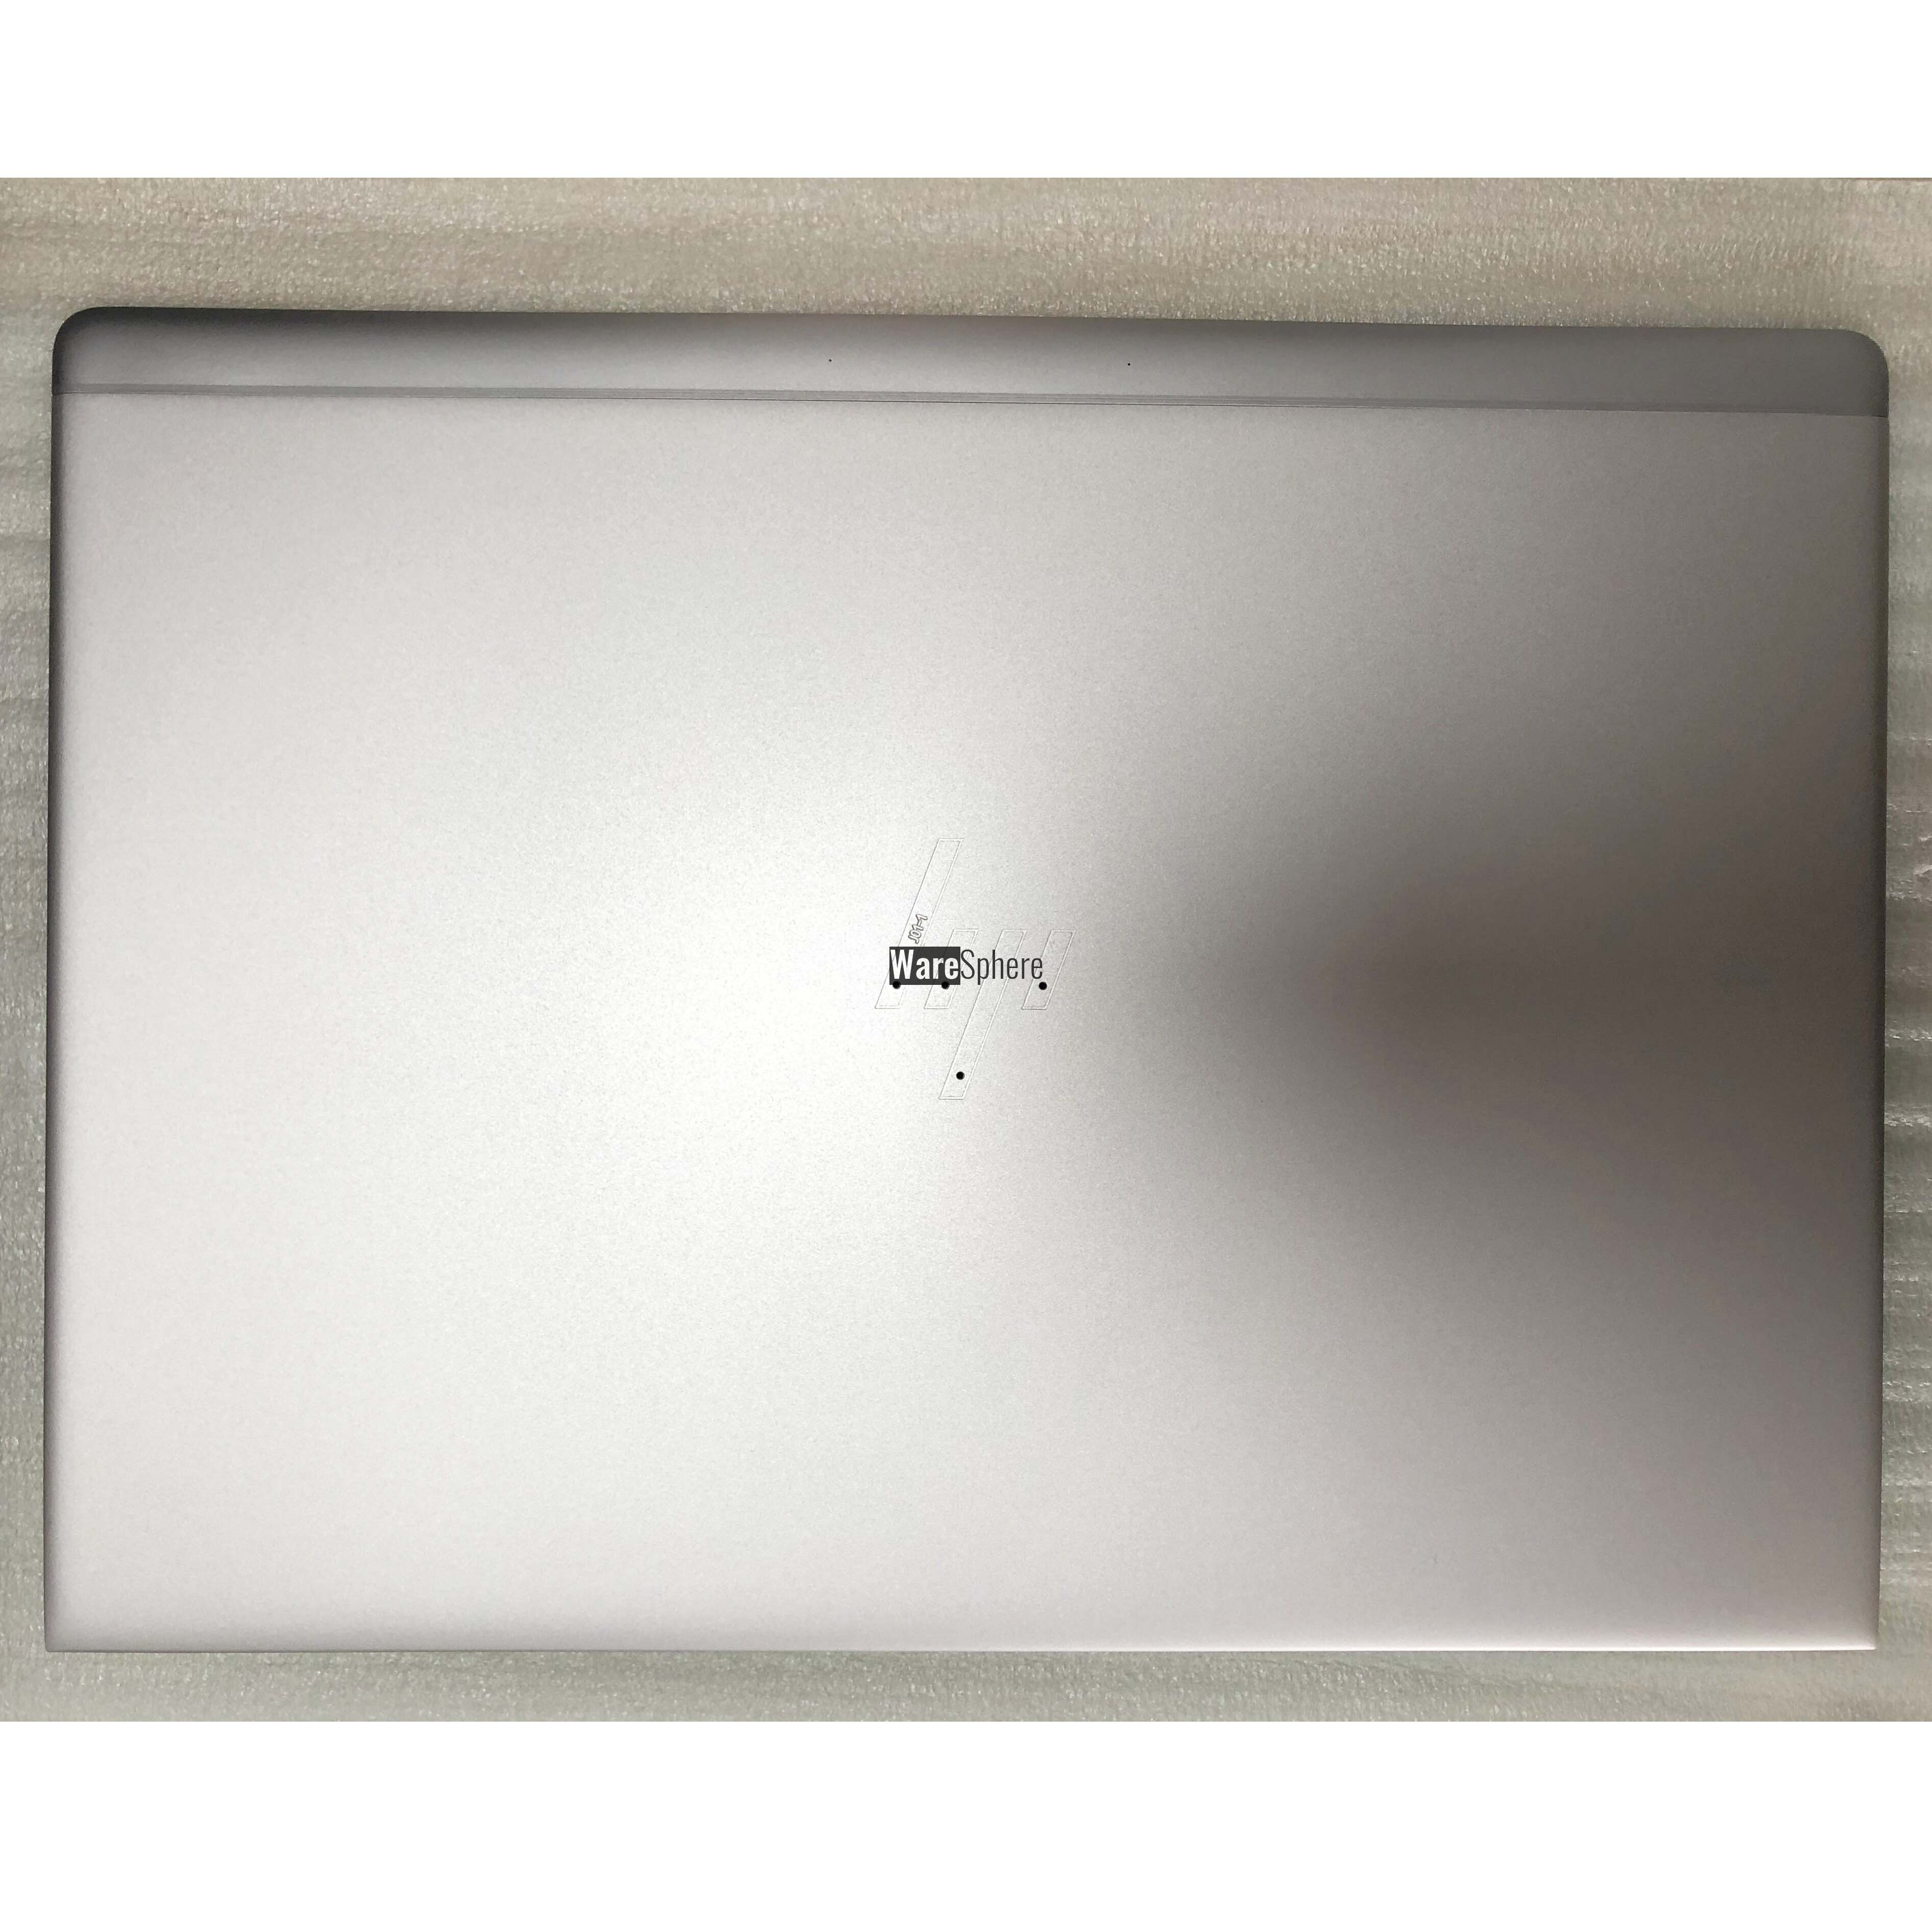 LCD Back Cover for HP ELITEBOOK 830 G6 L60615-001 6070B1501801 Silver